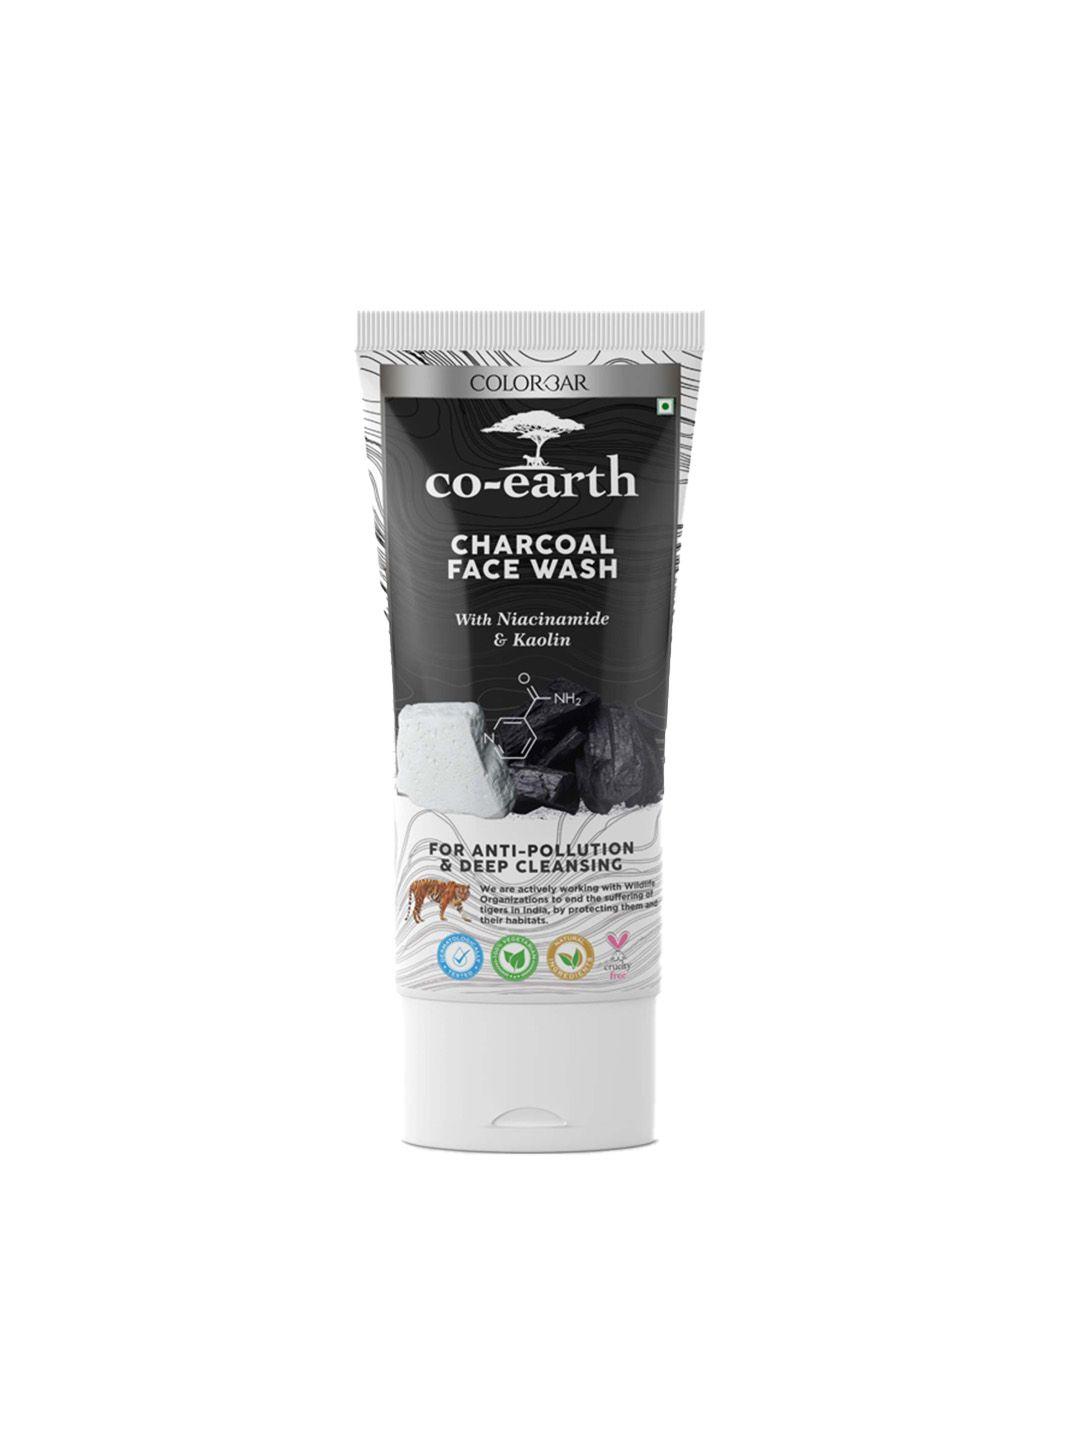 colorbar co-earth charcoal face wash with niacinamide & kaolin clay - 100 ml